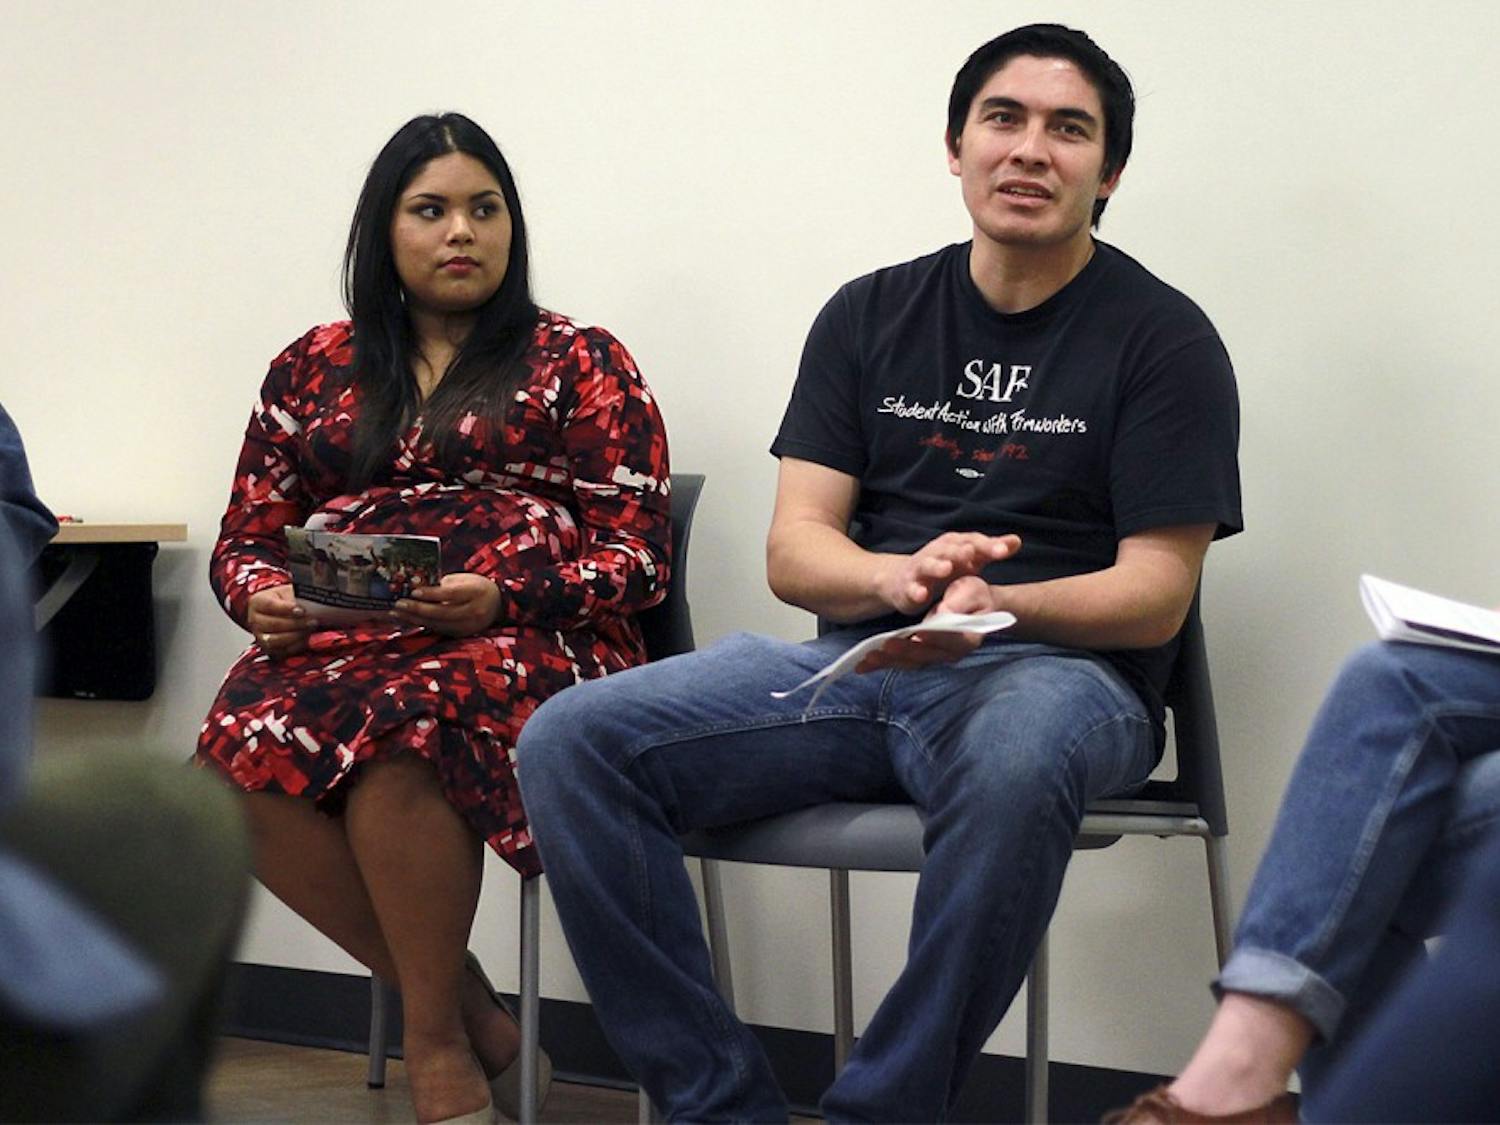 Jazmin Posas (left) and Ramon Zepeda of Student Action with Farmworkers joined UNC student organization FLO (fair, local, organic) to host a film screening and Thanksgiving potluck on Monday evening.